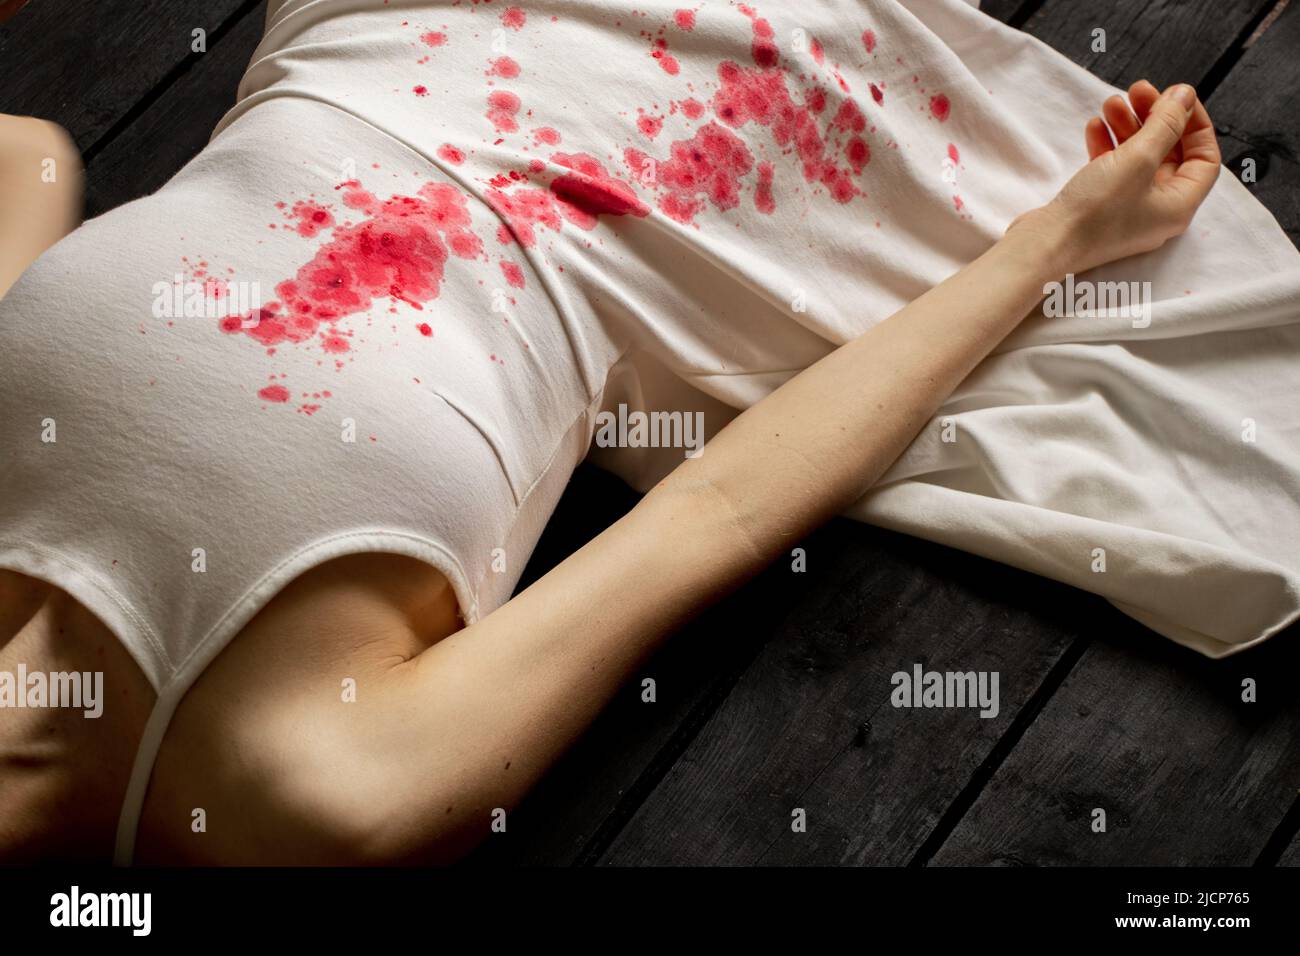 A murdered and tortured Ukrainian woman in a white dress and bloodstains lies on the floor of the house, a protest action by Ukrainian women, protecti Stock Photo